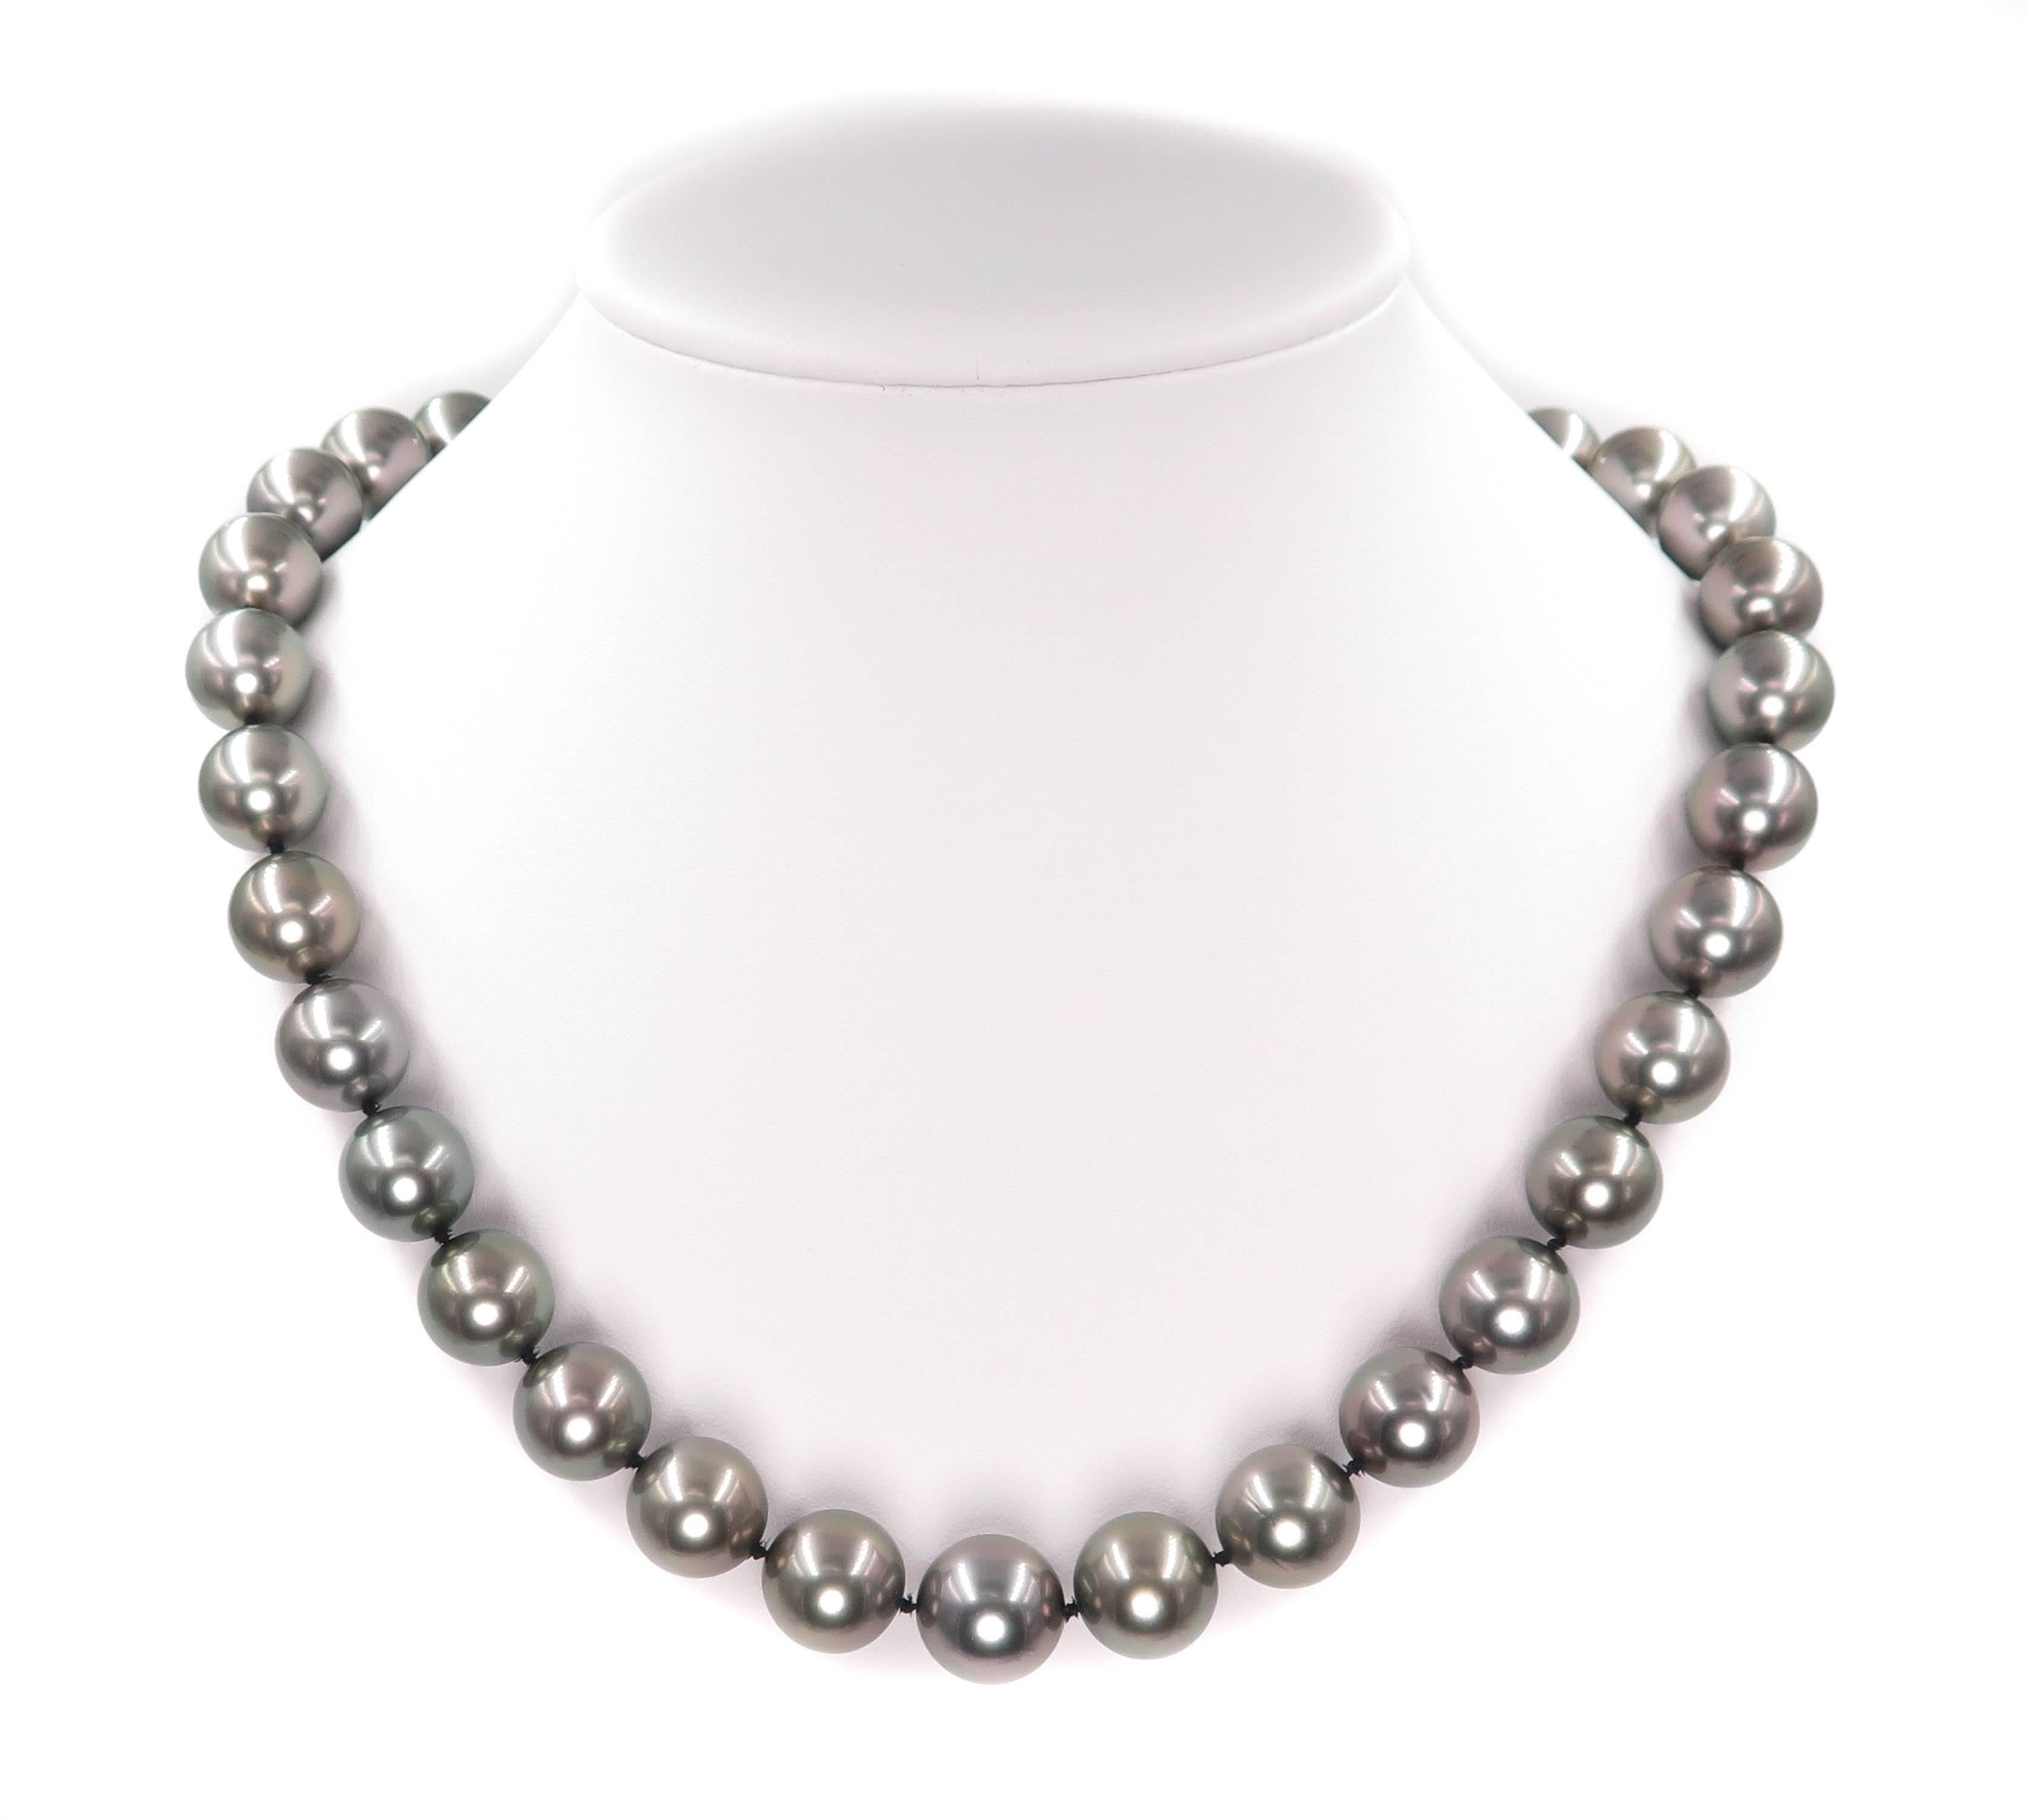 Graduated Black South Sea Pearl Necklace For Sale 1